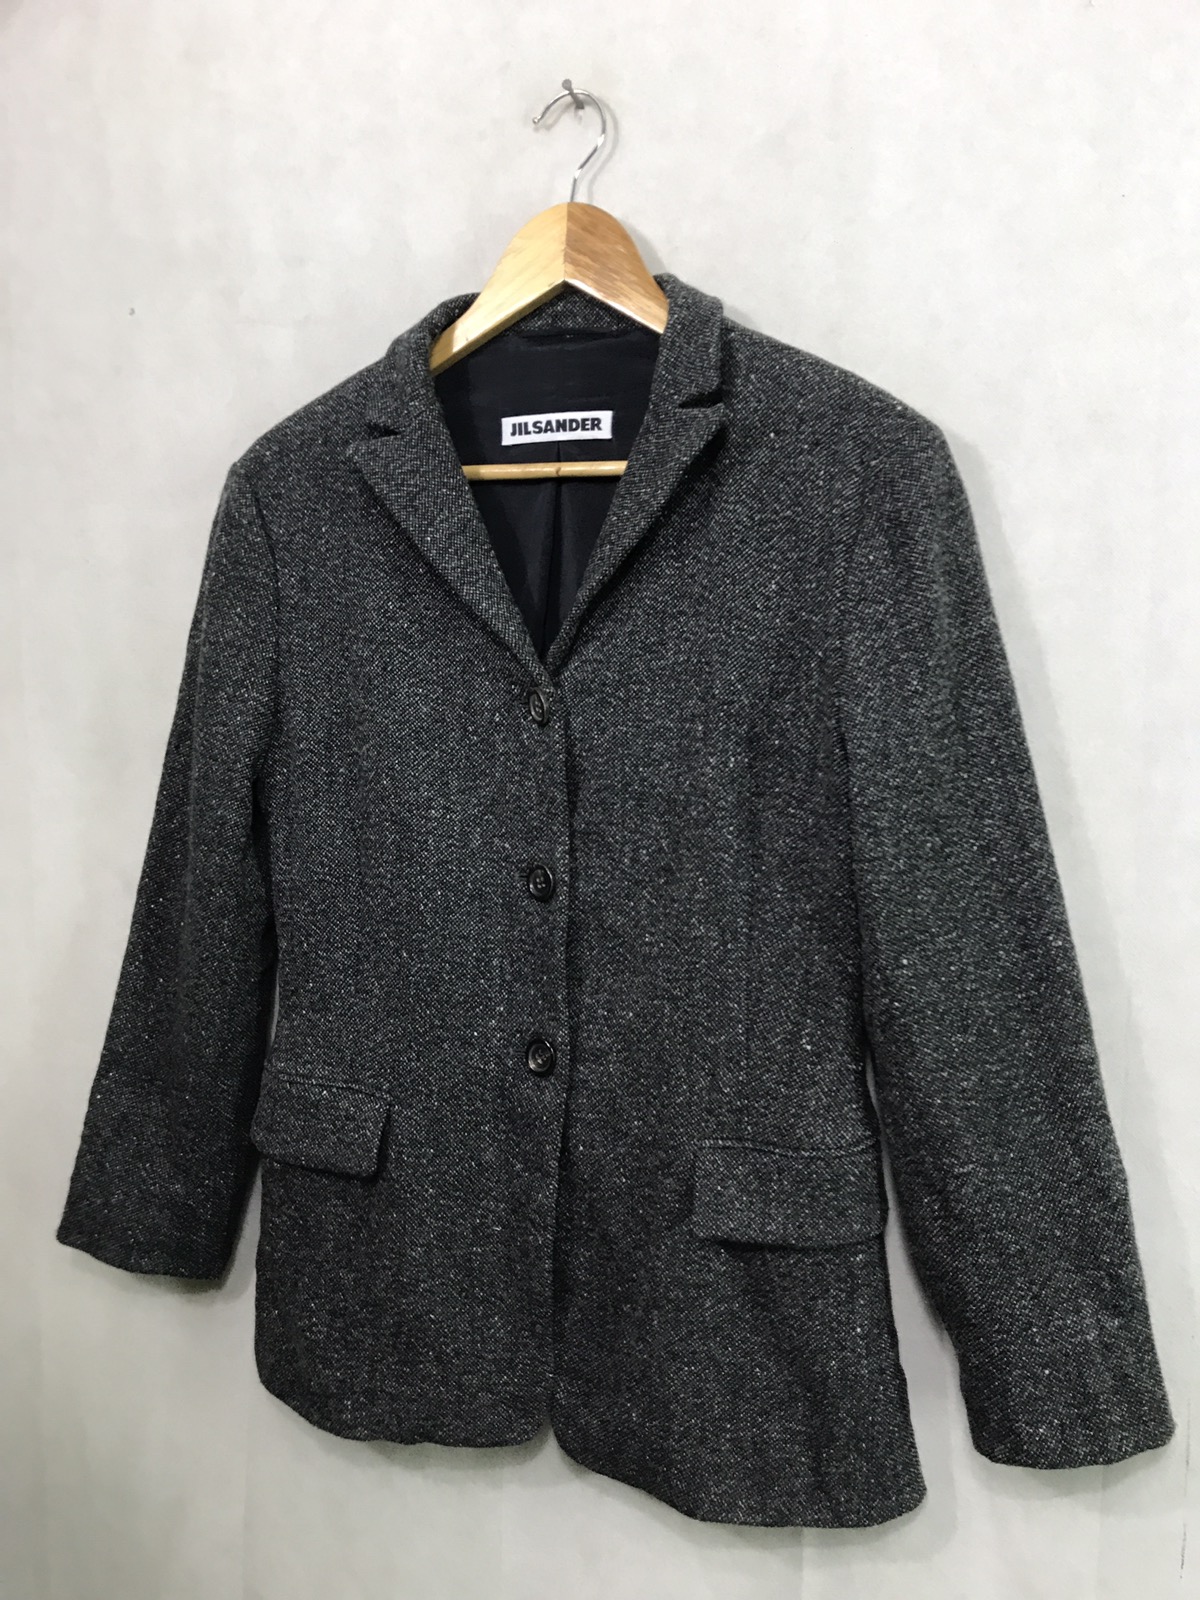 Jacket made in germany - 3